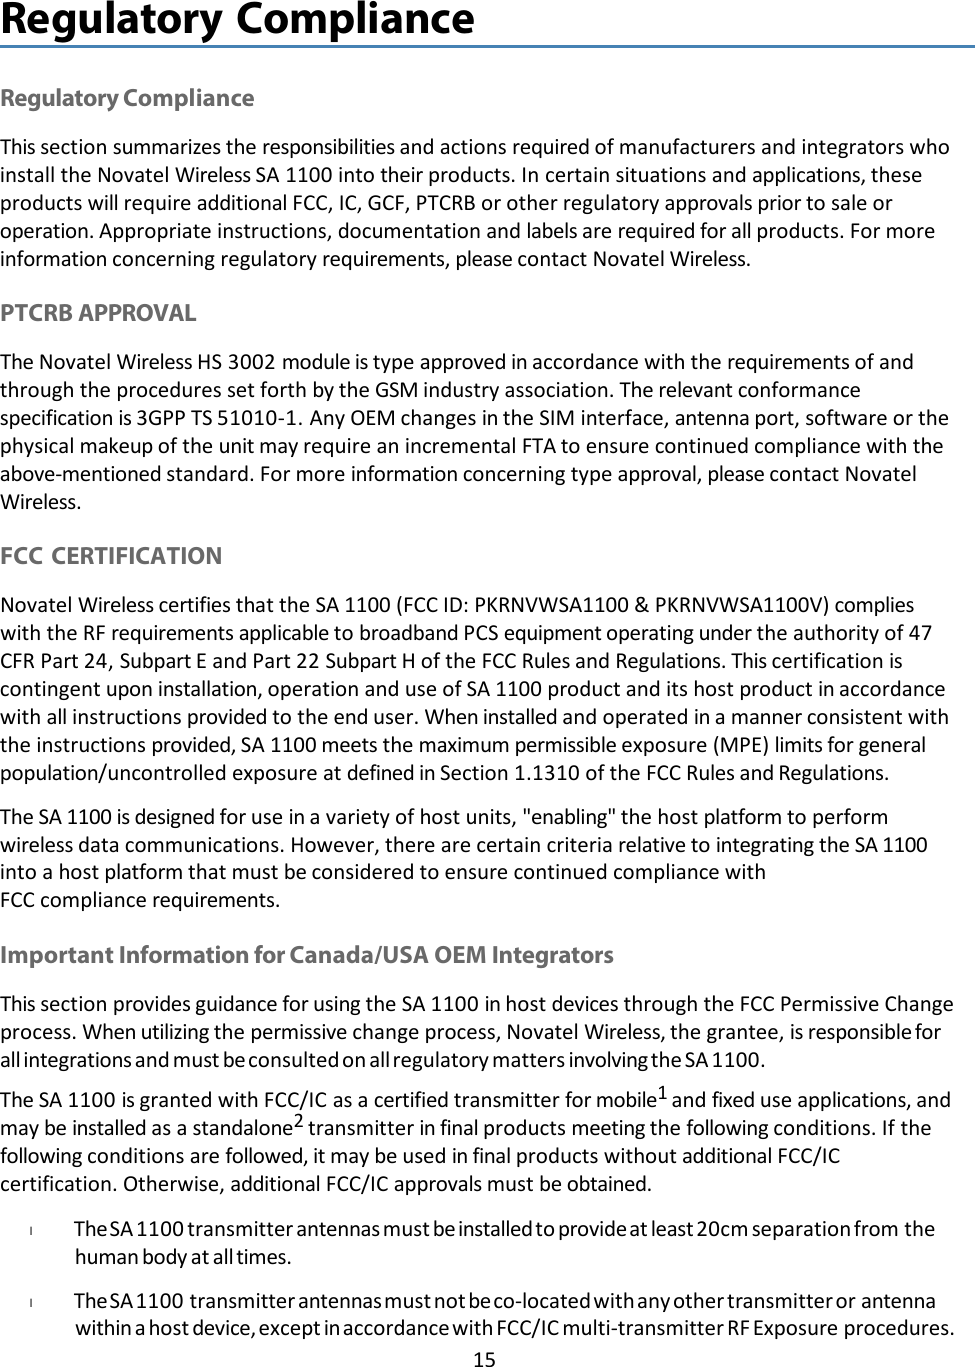 15   Regulatory Compliance   Regulatory Compliance This section summarizes the responsibilities and actions required of manufacturers and integrators who install the Novatel Wireless SA 1100 into their products. In certain situations and applications, these products will require additional FCC, IC, GCF, PTCRB or other regulatory approvals prior to sale or operation. Appropriate instructions, documentation and labels are required for all products. For more information concerning regulatory requirements, please contact Novatel Wireless.  PTCRB APPROVAL The Novatel Wireless HS 3002 module is type approved in accordance with the requirements of and through the procedures set forth by the GSM industry association. The relevant conformance specification is 3GPP TS 51010-1. Any OEM changes in the SIM interface, antenna port, software or the physical makeup of the unit may require an incremental FTA to ensure continued compliance with the above-mentioned standard. For more information concerning type approval, please contact Novatel Wireless.  FCC CERTIFICATION Novatel Wireless certifies that the SA 1100 (FCC ID: PKRNVWSA1100 &amp; PKRNVWSA1100V) complies with the RF requirements applicable to broadband PCS equipment operating under the authority of 47 CFR Part 24, Subpart E and Part 22 Subpart H of the FCC Rules and Regulations. This certification is contingent upon installation, operation and use of SA 1100 product and its host product in accordance with all instructions provided to the end user. When installed and operated in a manner consistent with the instructions provided, SA 1100 meets the maximum permissible exposure (MPE) limits for general population/uncontrolled exposure at defined in Section 1.1310 of the FCC Rules and Regulations. The SA 1100 is designed for use in a variety of host units, &quot;enabling&quot; the host platform to perform wireless data communications. However, there are certain criteria relative to integrating the SA 1100 into a host platform that must be considered to ensure continued compliance with FCC compliance requirements.  Important Information for Canada/USA OEM Integrators This section provides guidance for using the SA 1100 in host devices through the FCC Permissive Change process. When utilizing the permissive change process, Novatel Wireless, the grantee, is responsible for all integrations and must be consulted on all regulatory matters involving the SA 1100. The SA 1100 is granted with FCC/IC as a certified transmitter for mobile1 and fixed use applications, and may be installed as a standalone2 transmitter in final products meeting the following conditions. If the following conditions are followed, it may be used in final products without additional FCC/IC certification. Otherwise, additional FCC/IC approvals must be obtained. l             The SA 1100 transmitter antennas must be installed to provide at least 20cm separation from the human body at all times. l             The SA 1100 transmitter antennas must not be co-located with any other transmitter or antenna within a host device, except in accordance with FCC/IC multi-transmitter RF Exposure procedures. 